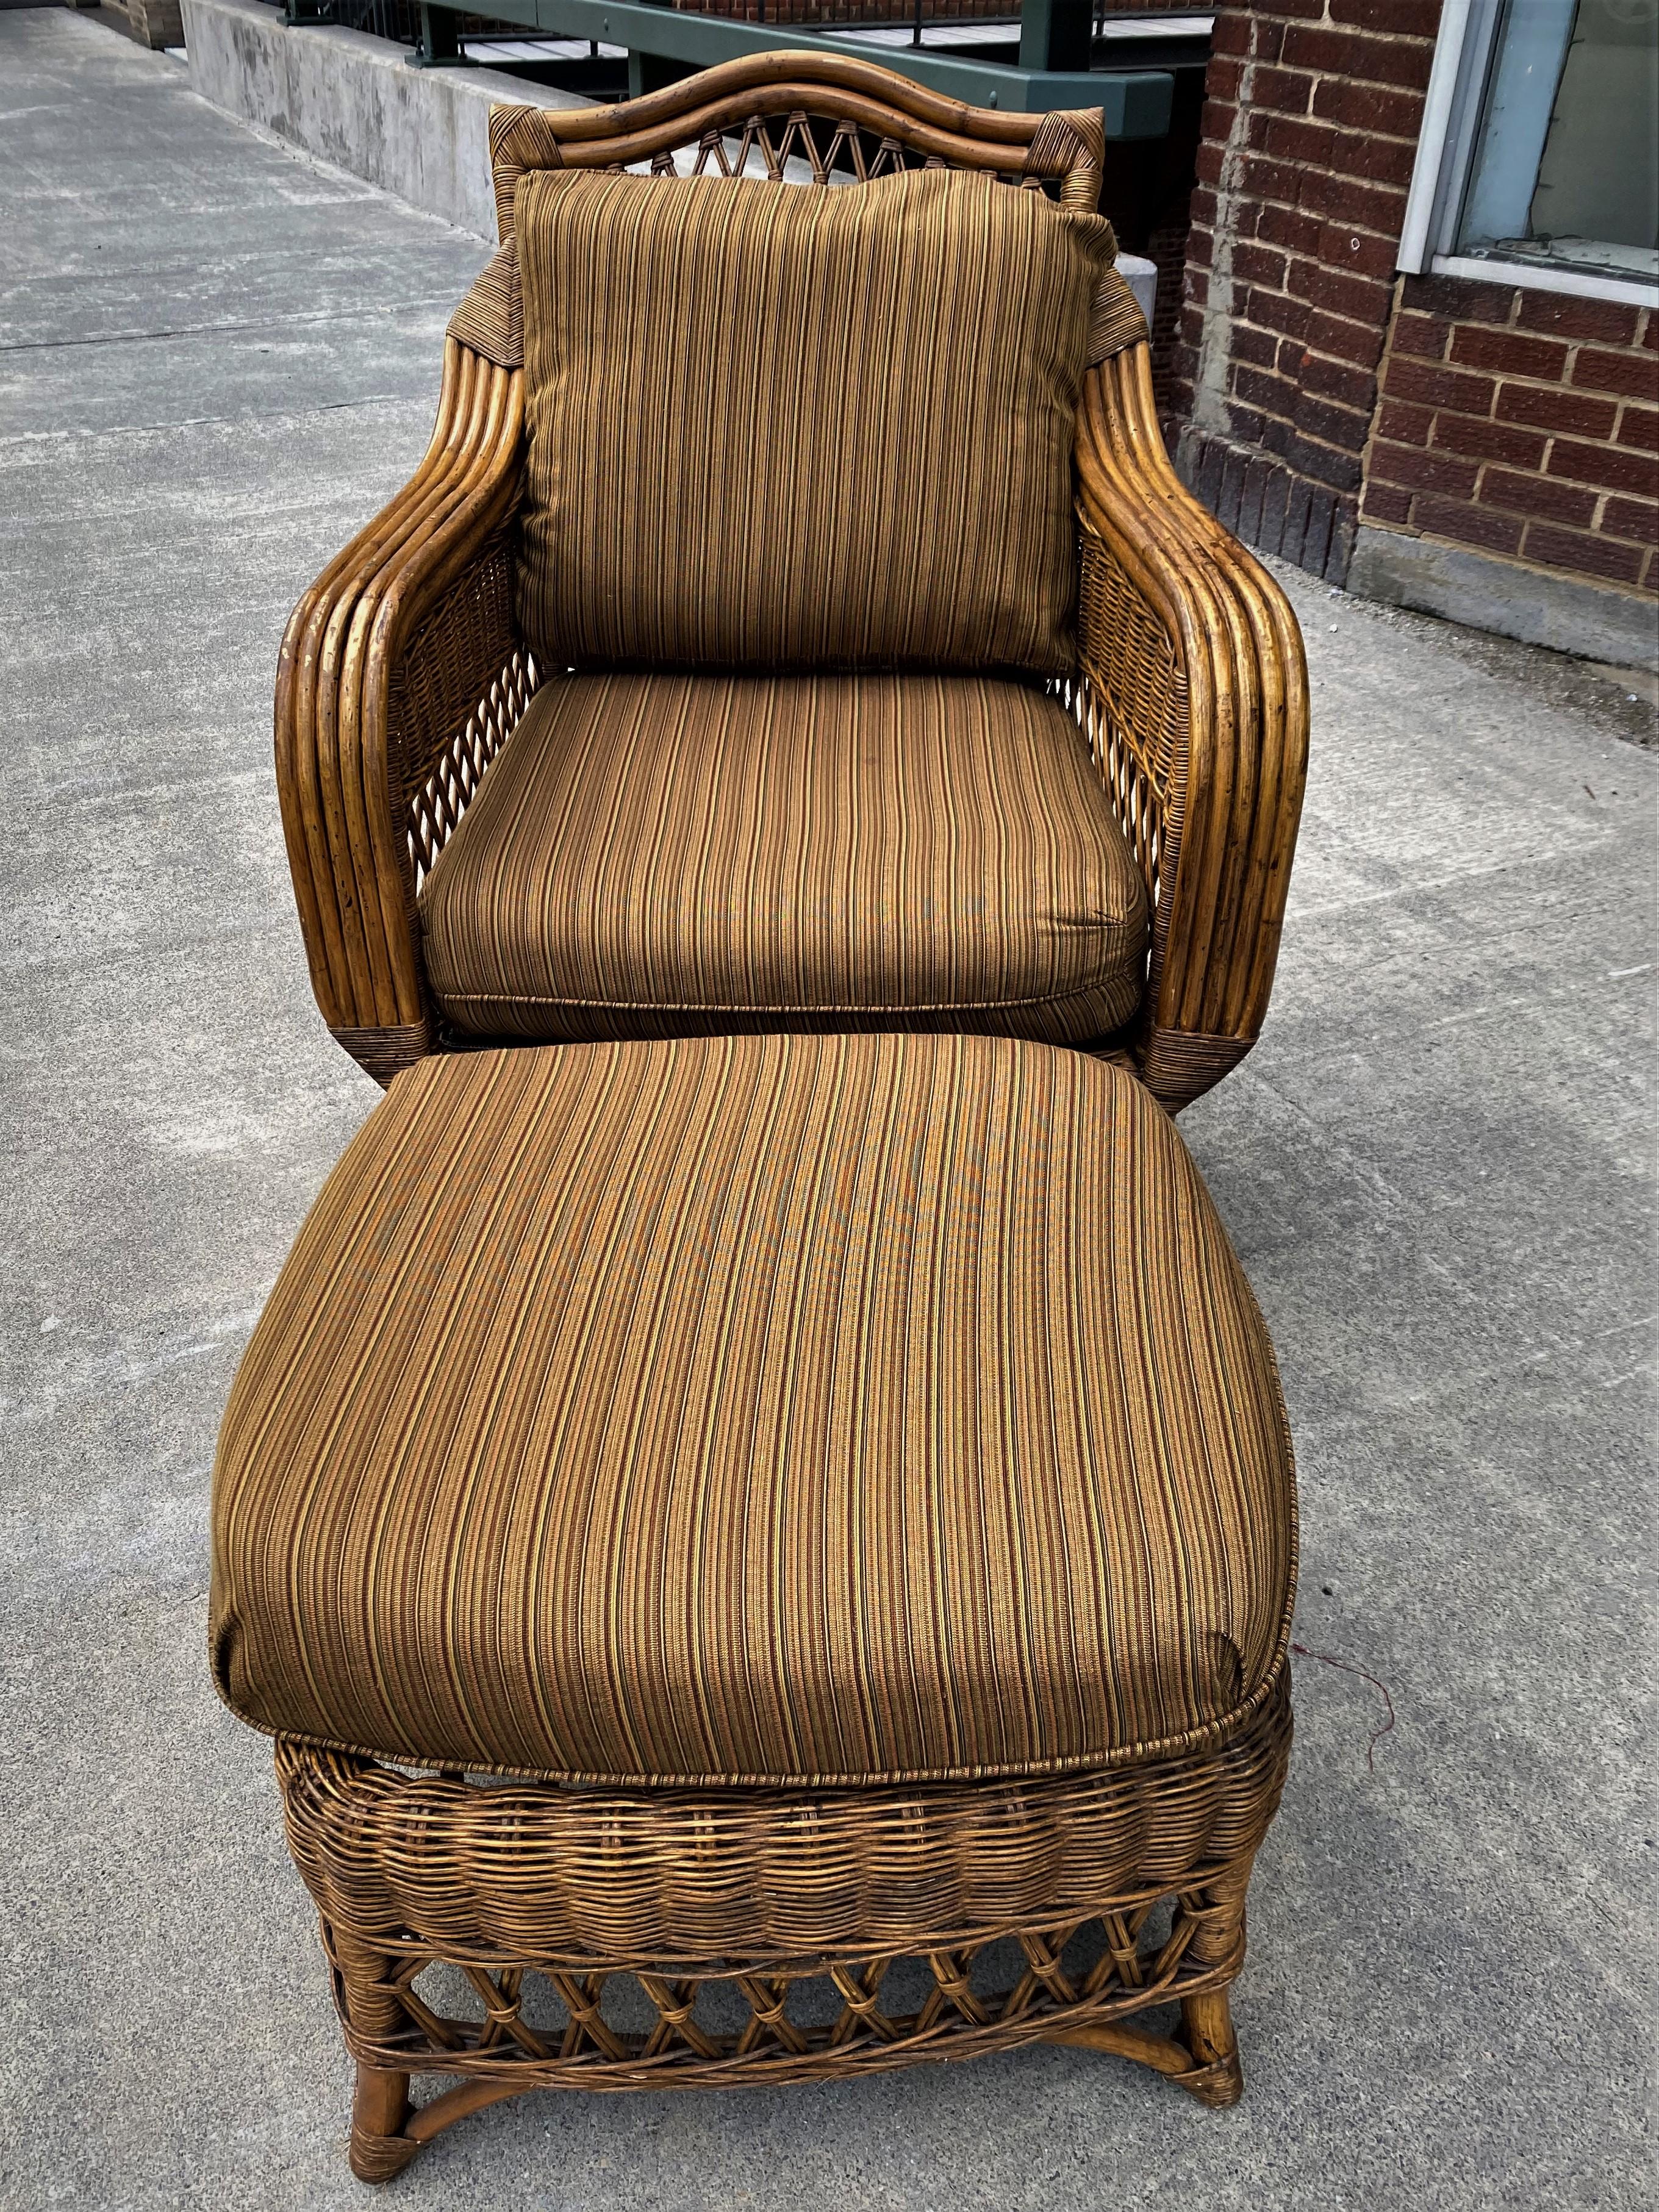 This is a great looking Henry Link Rattan armchair with matching ottoman that has very neutral brown and dark color striped upholstery which has some minor pulls and discoloration but is very useable and will blend with florals or other patterns.